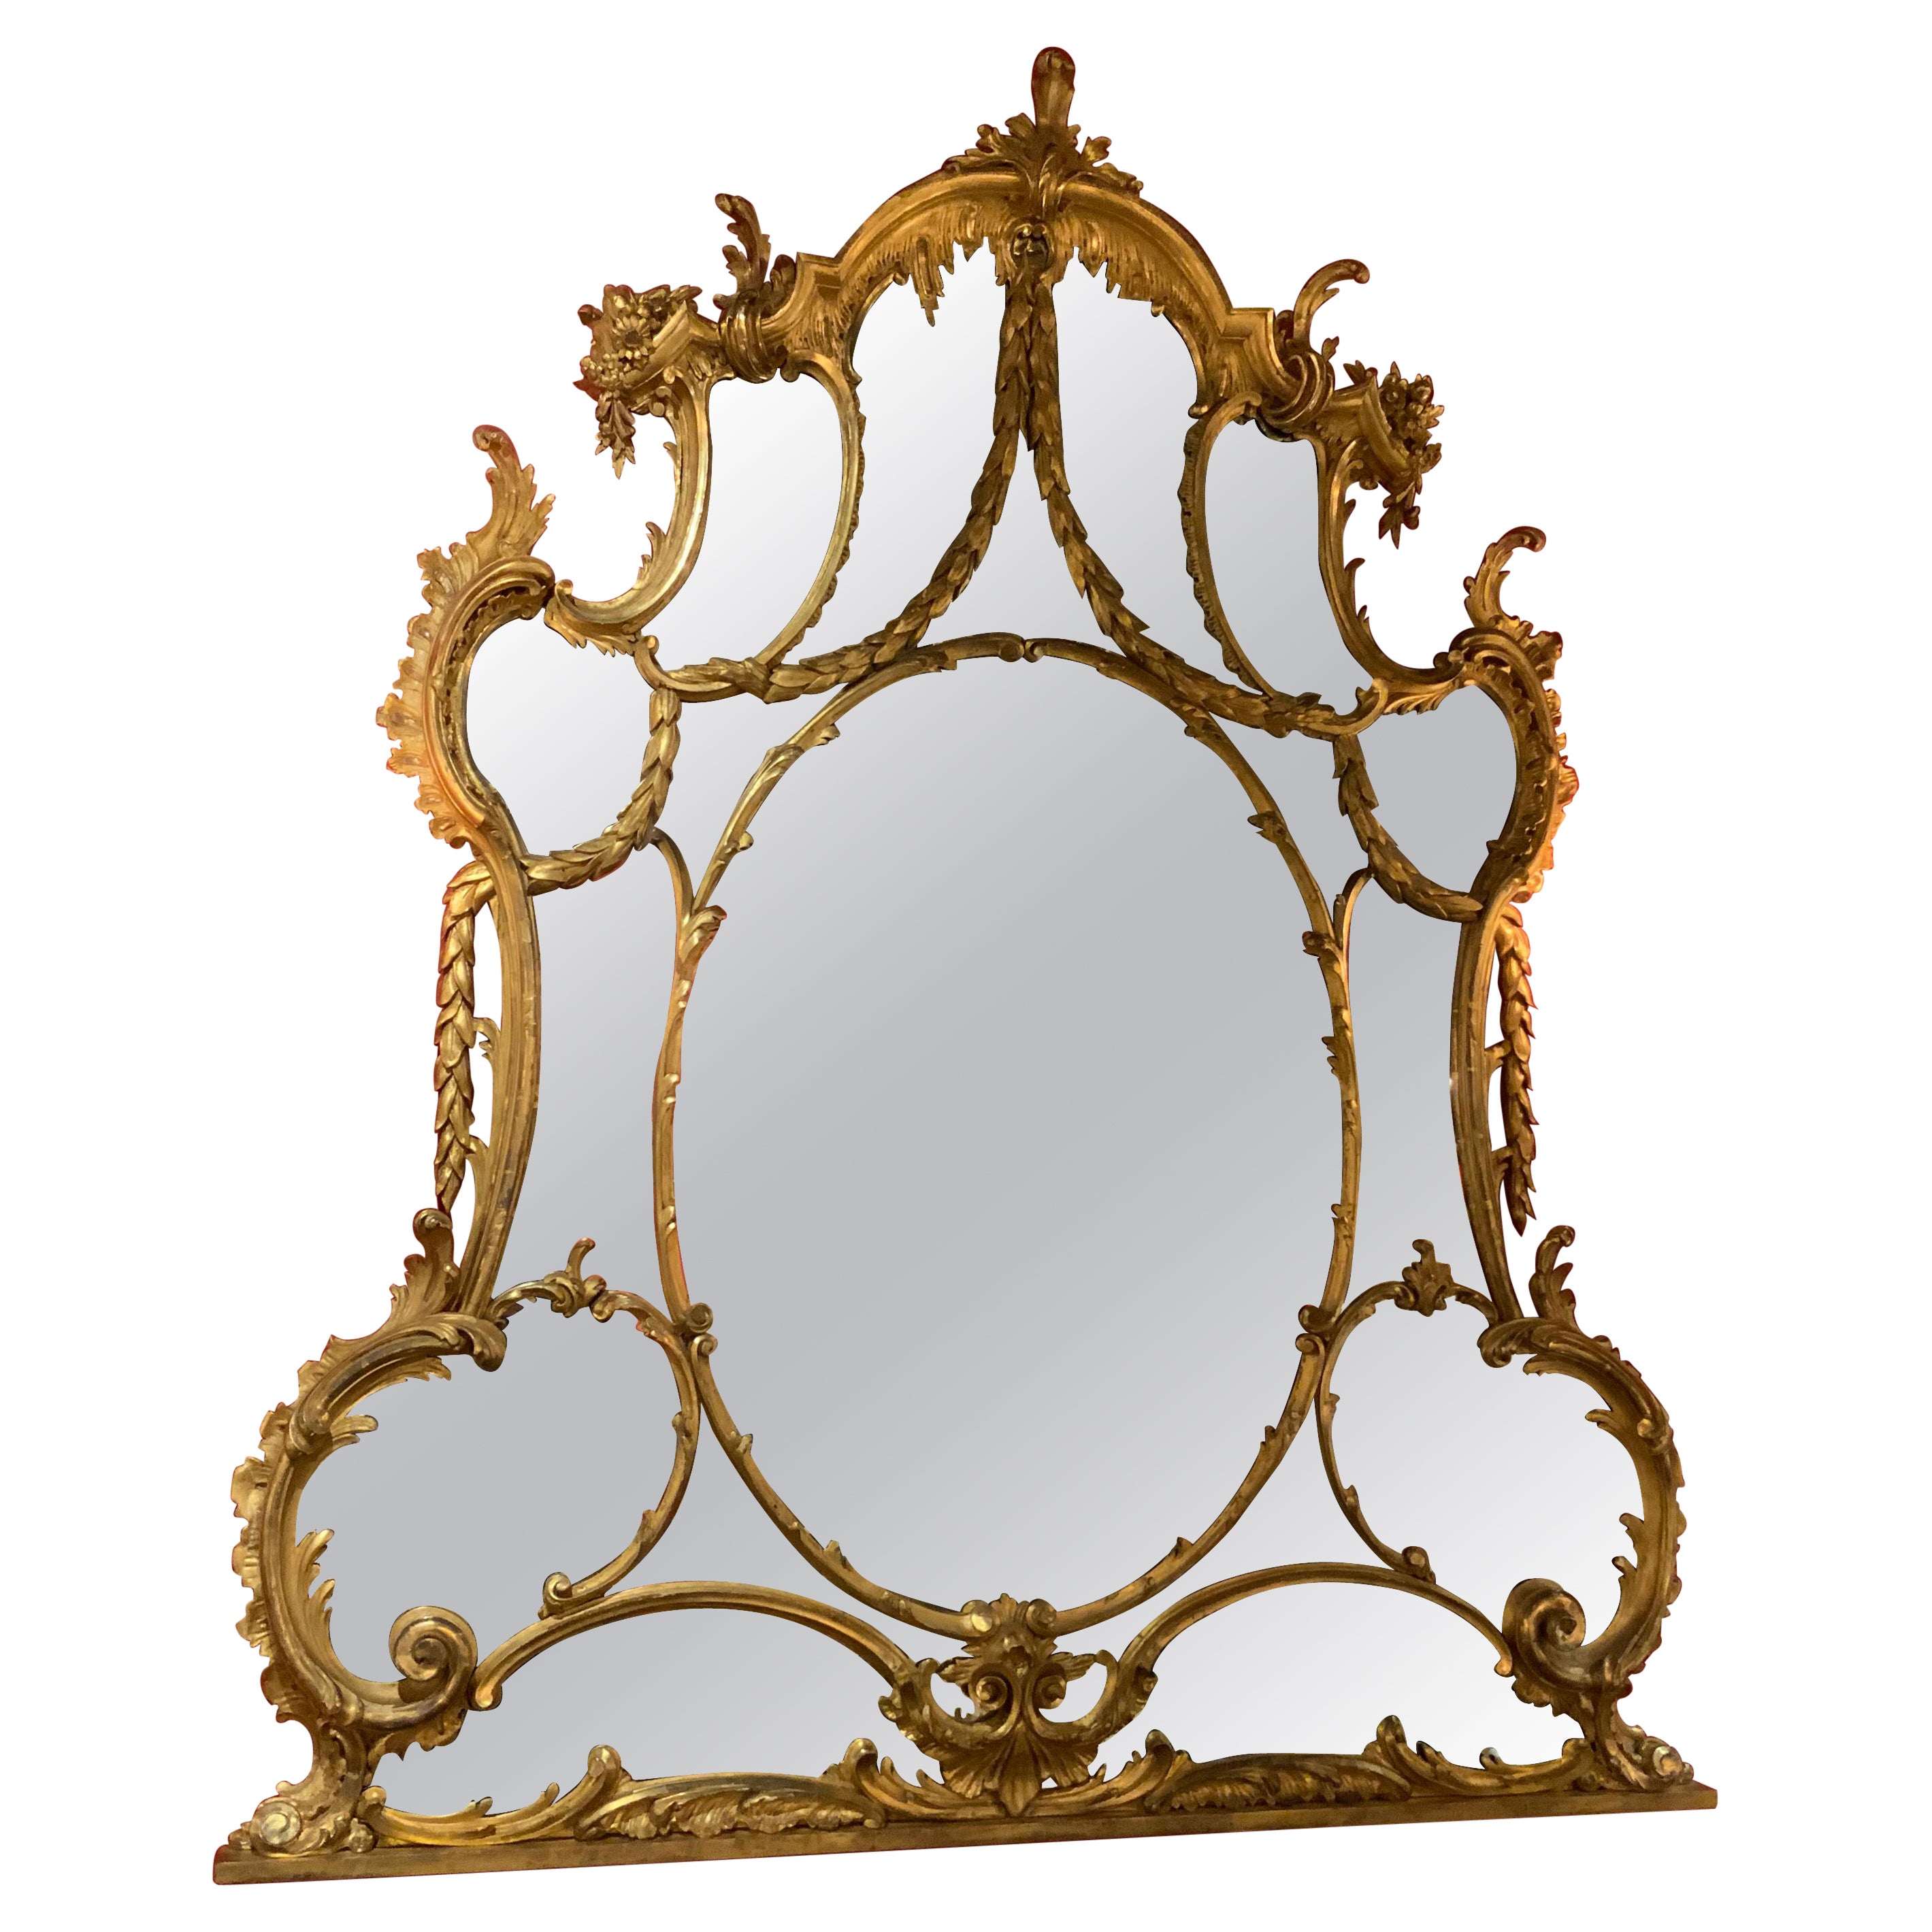 Large Giltwood Chinese Chippendale Mirror, George III Style, 18th Century